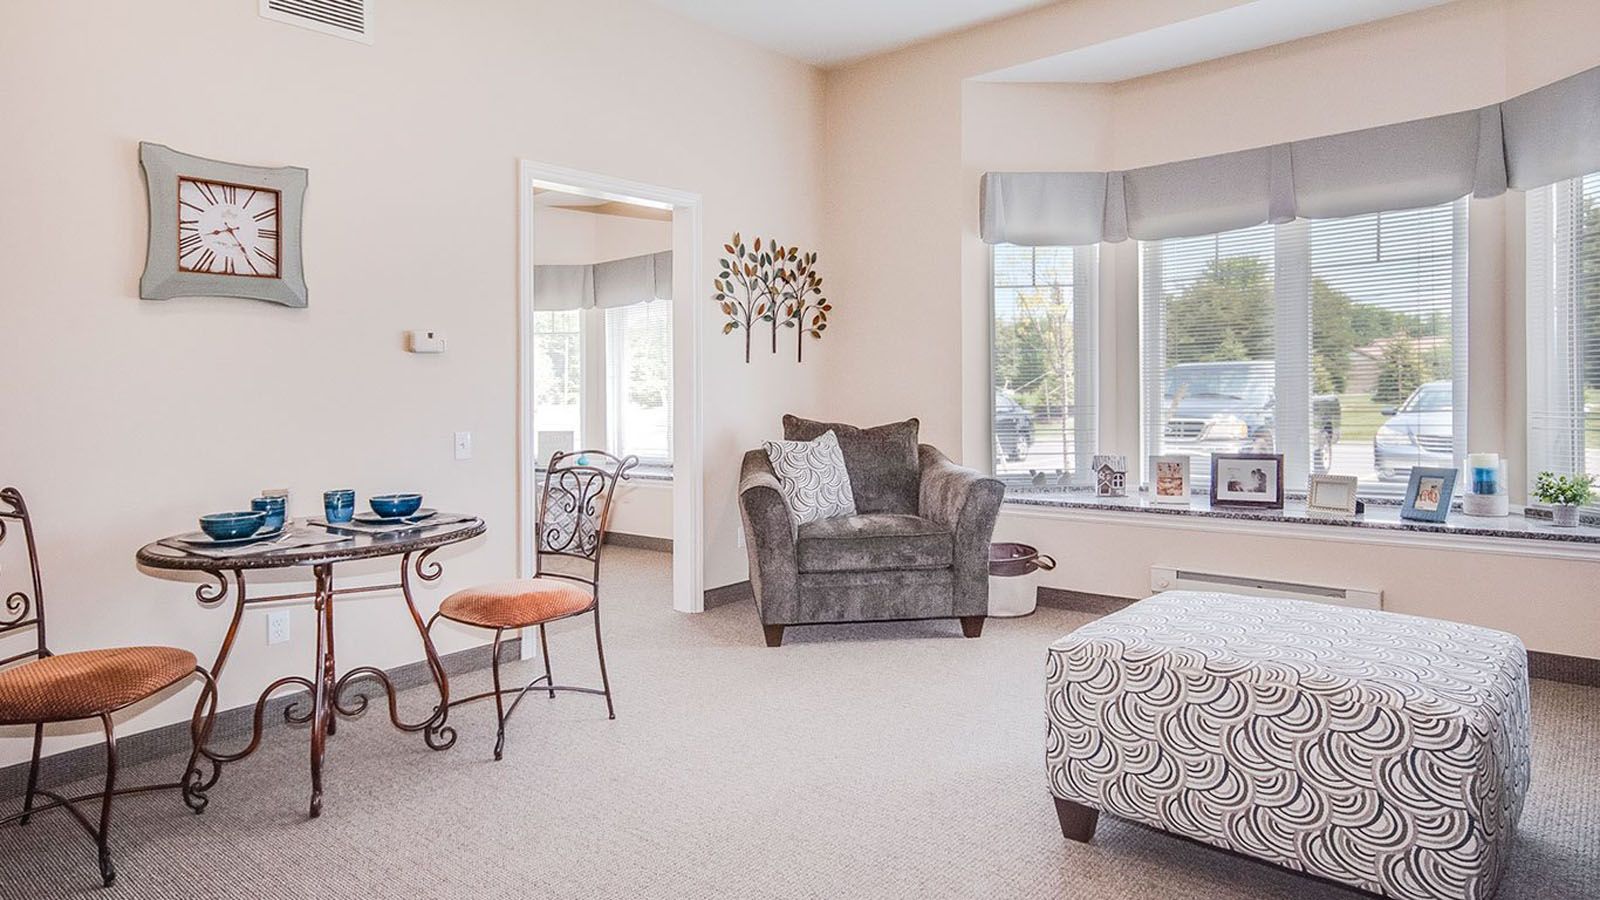 Senior living community, Grandhaven Living Center, featuring home decor, furniture, bay window view.